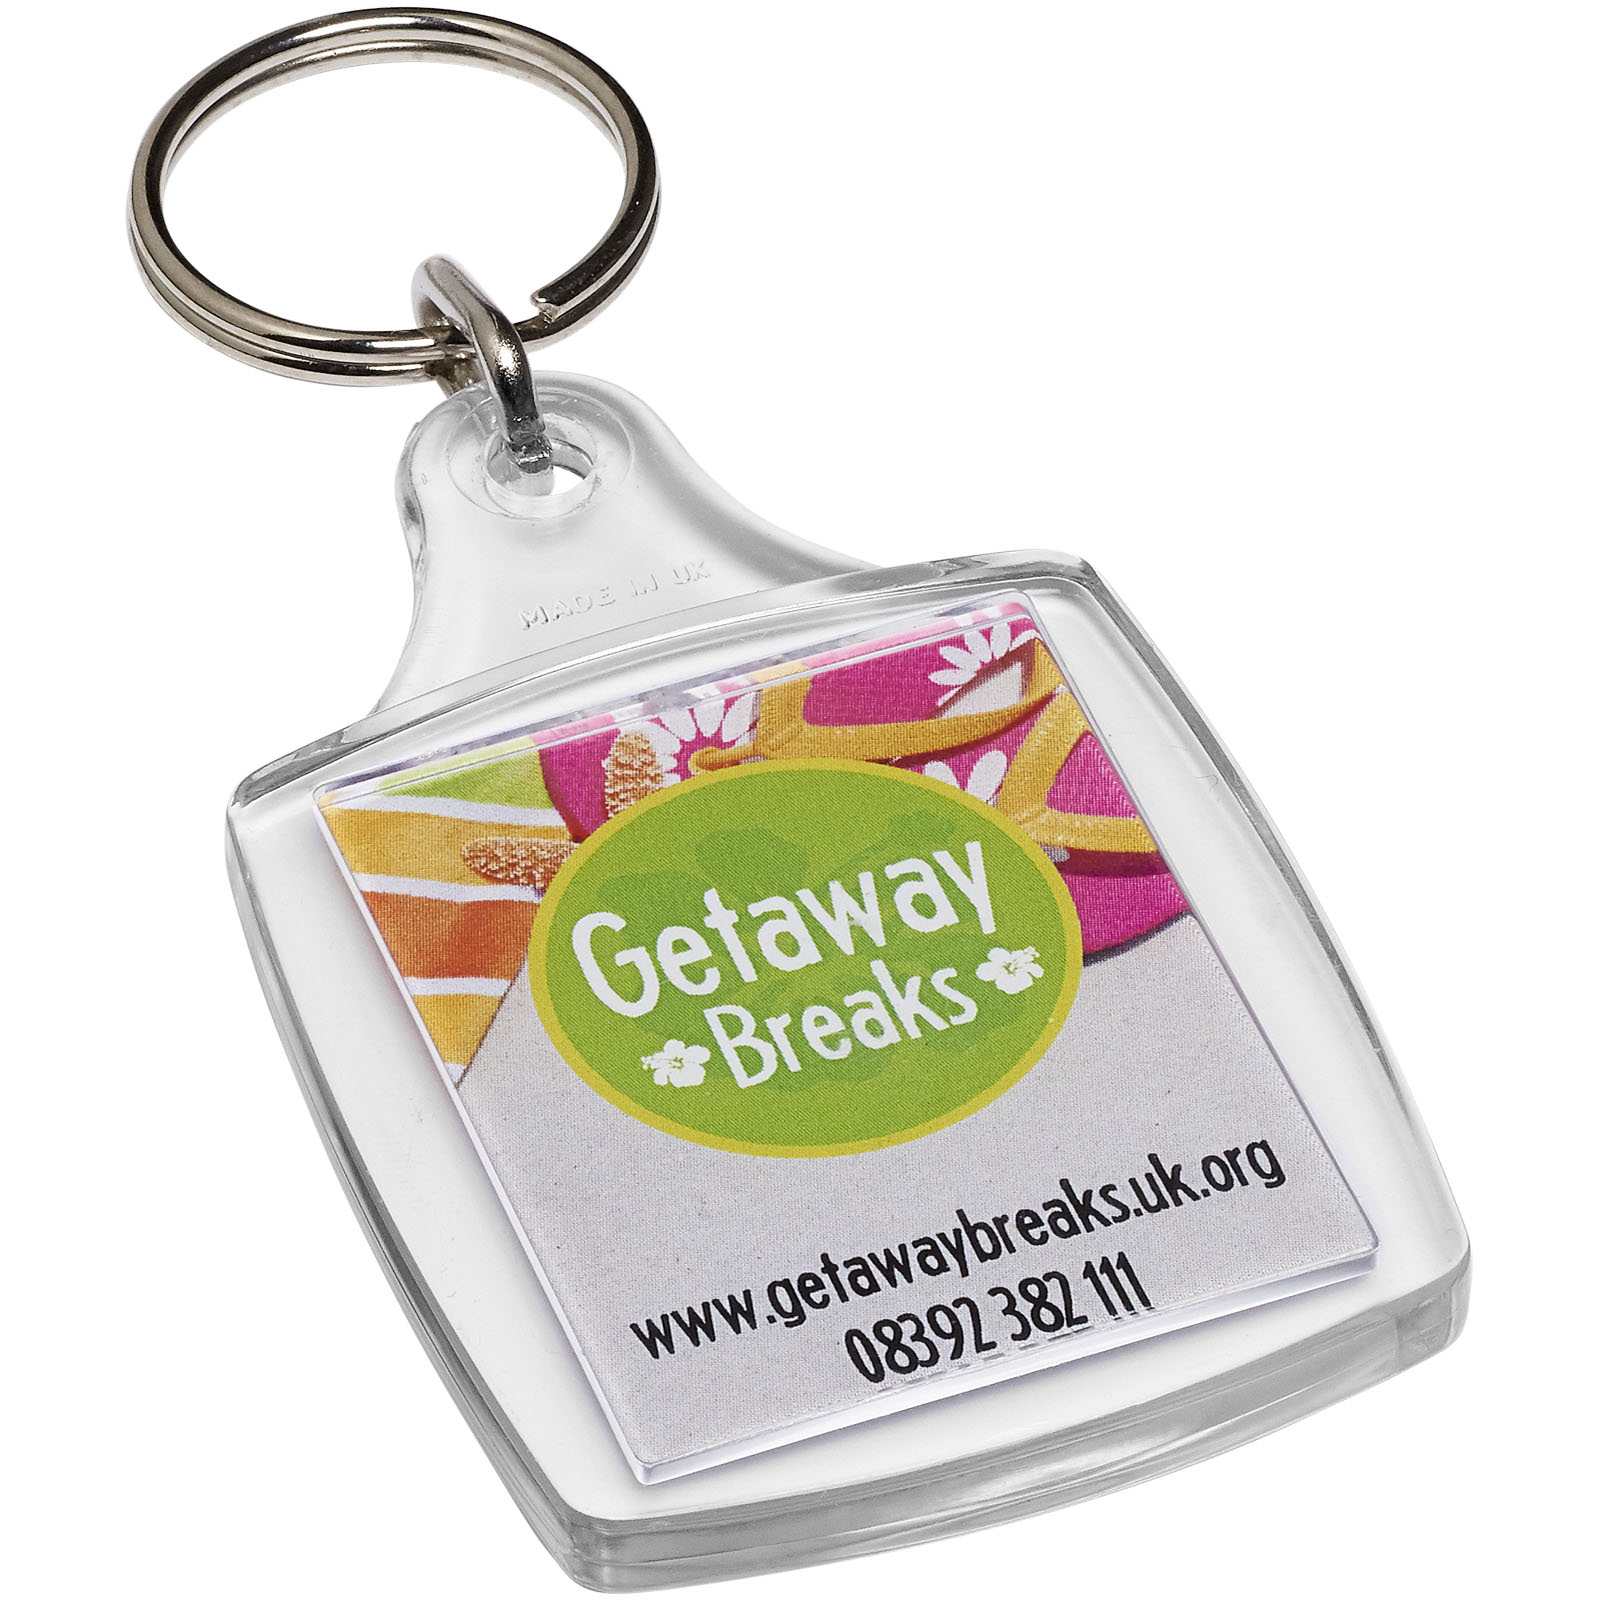 Advertising Keychains & Keyrings - Tour A5 keychain